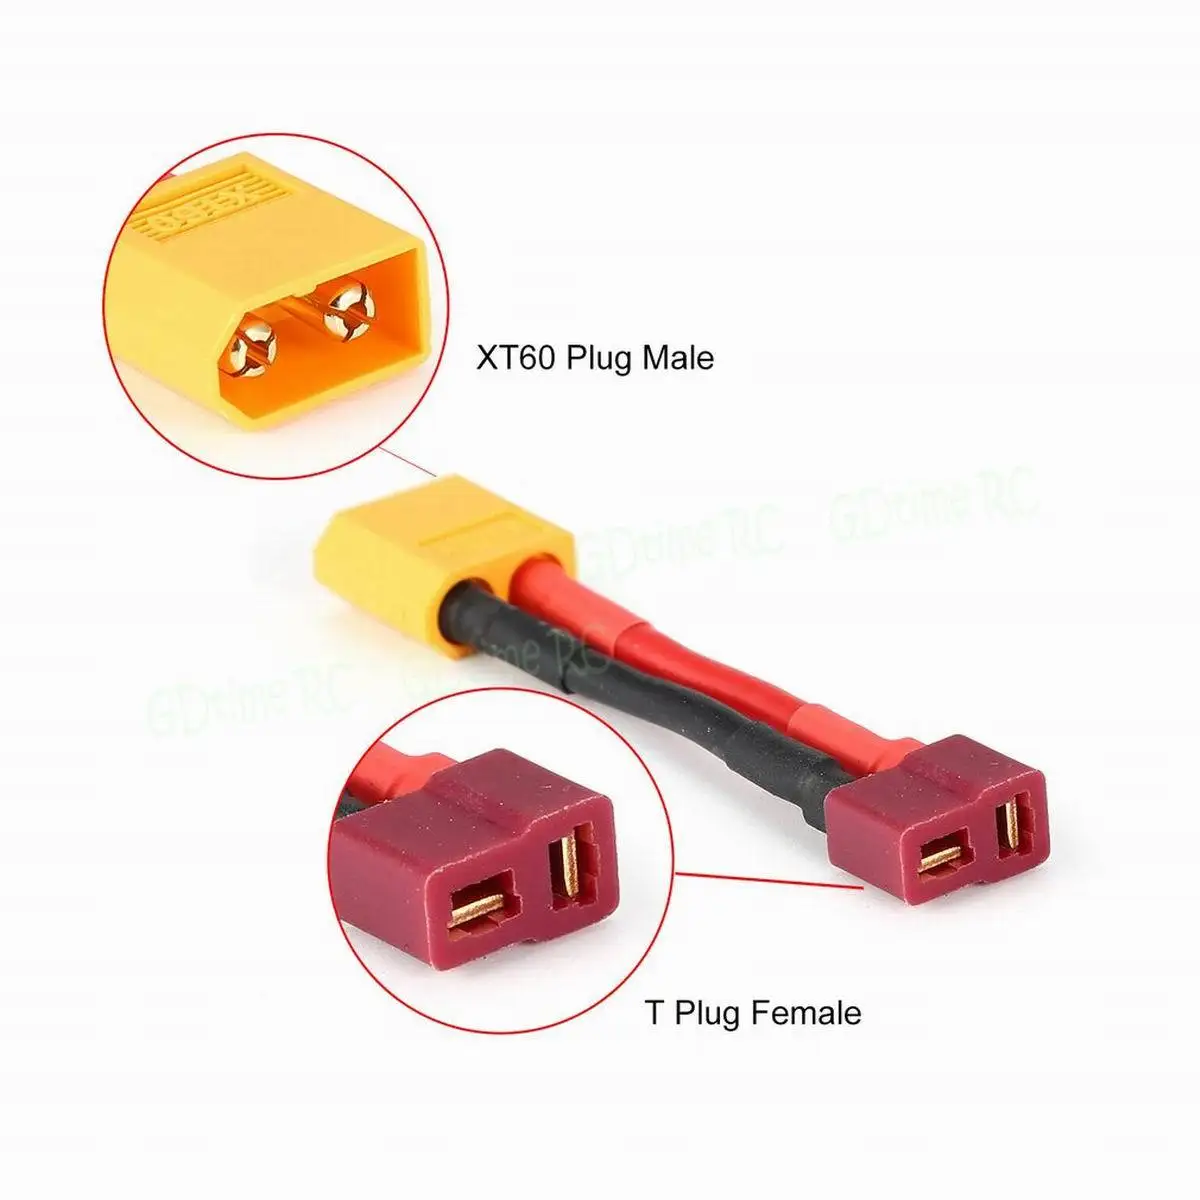 

XT60 Plug Male To T Plug Female Connector Connector Adapter Cable Converter Multi Charging Plug Cable for RC Quadcopter